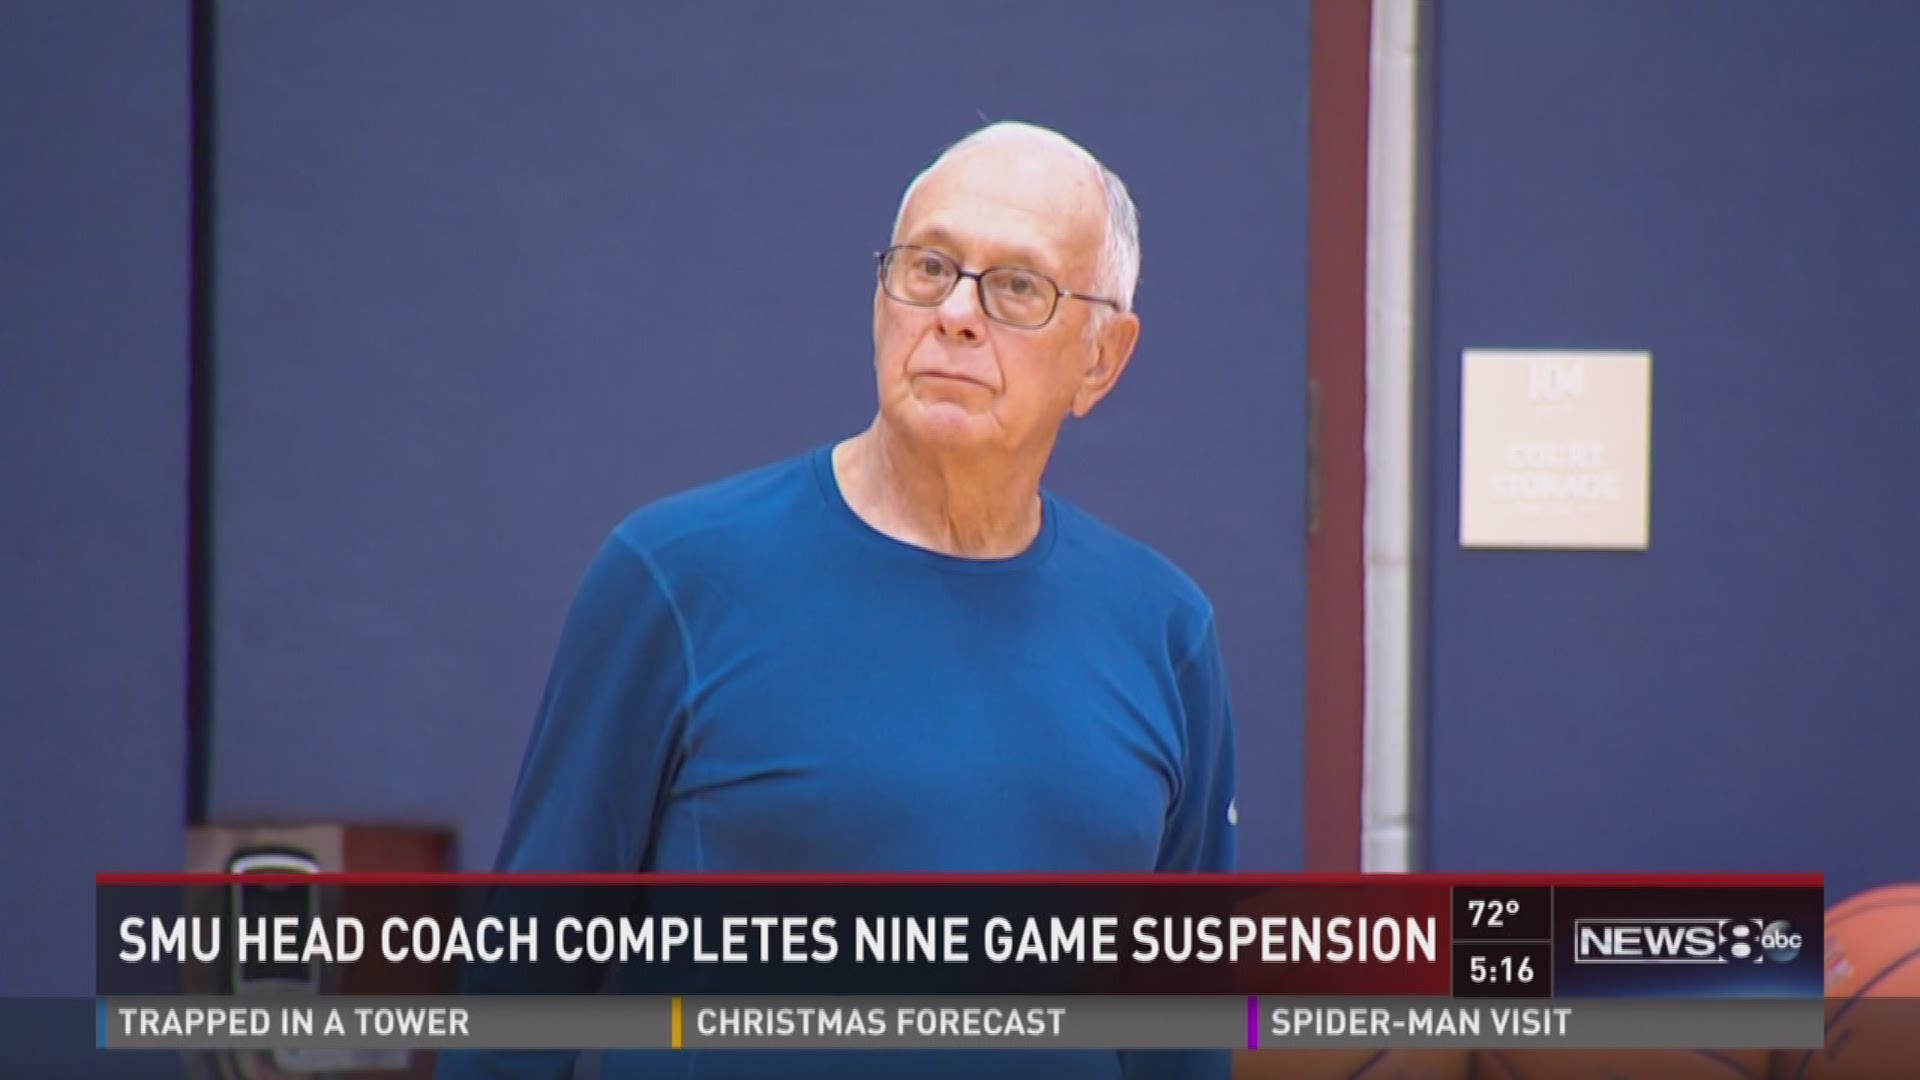 Coach Larry Brown has completed his NCAA suspension for academic fraud and unethical conduct.